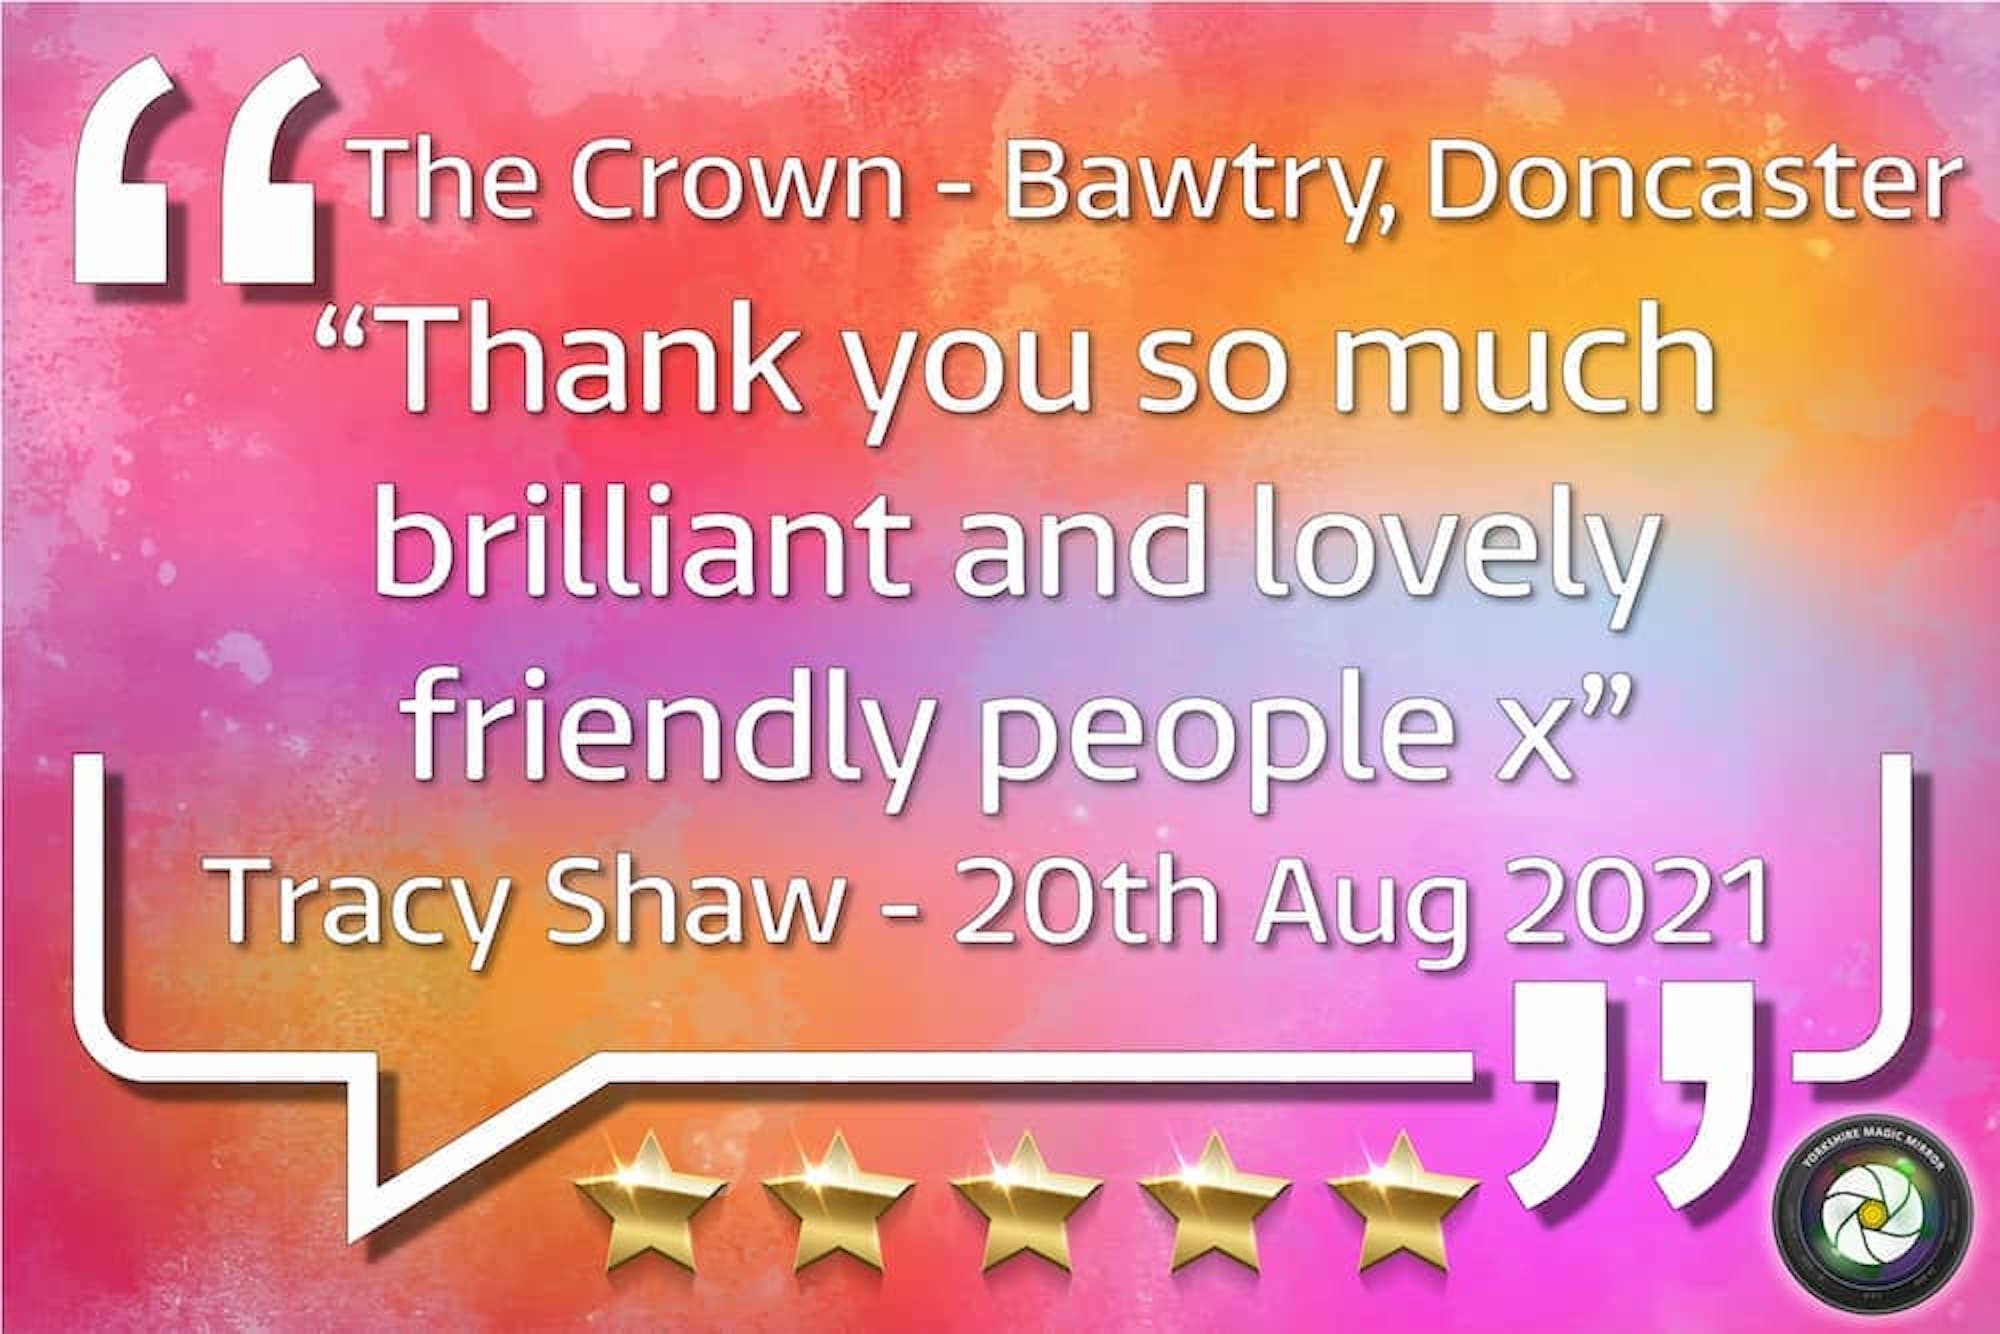 The Crown Bawtry Tracy Shaw Wedding 2022